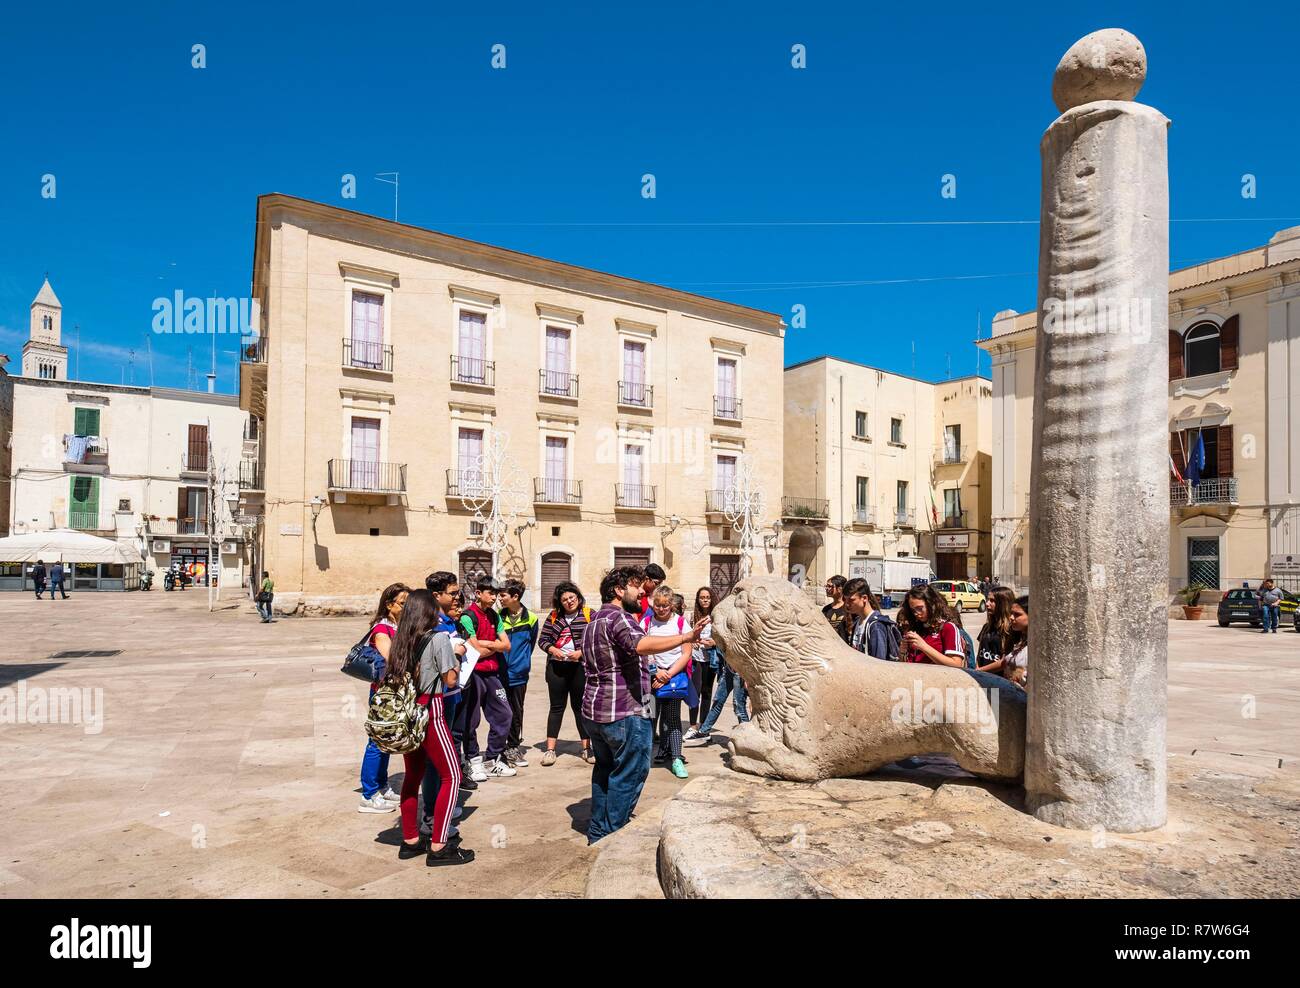 Italy, Apulia, Bari, Old Town or Bari Vecchia, Piazza Mercantile, the infamous column and the lion of justice, place of public punishment of debtors in medieval times Stock Photo